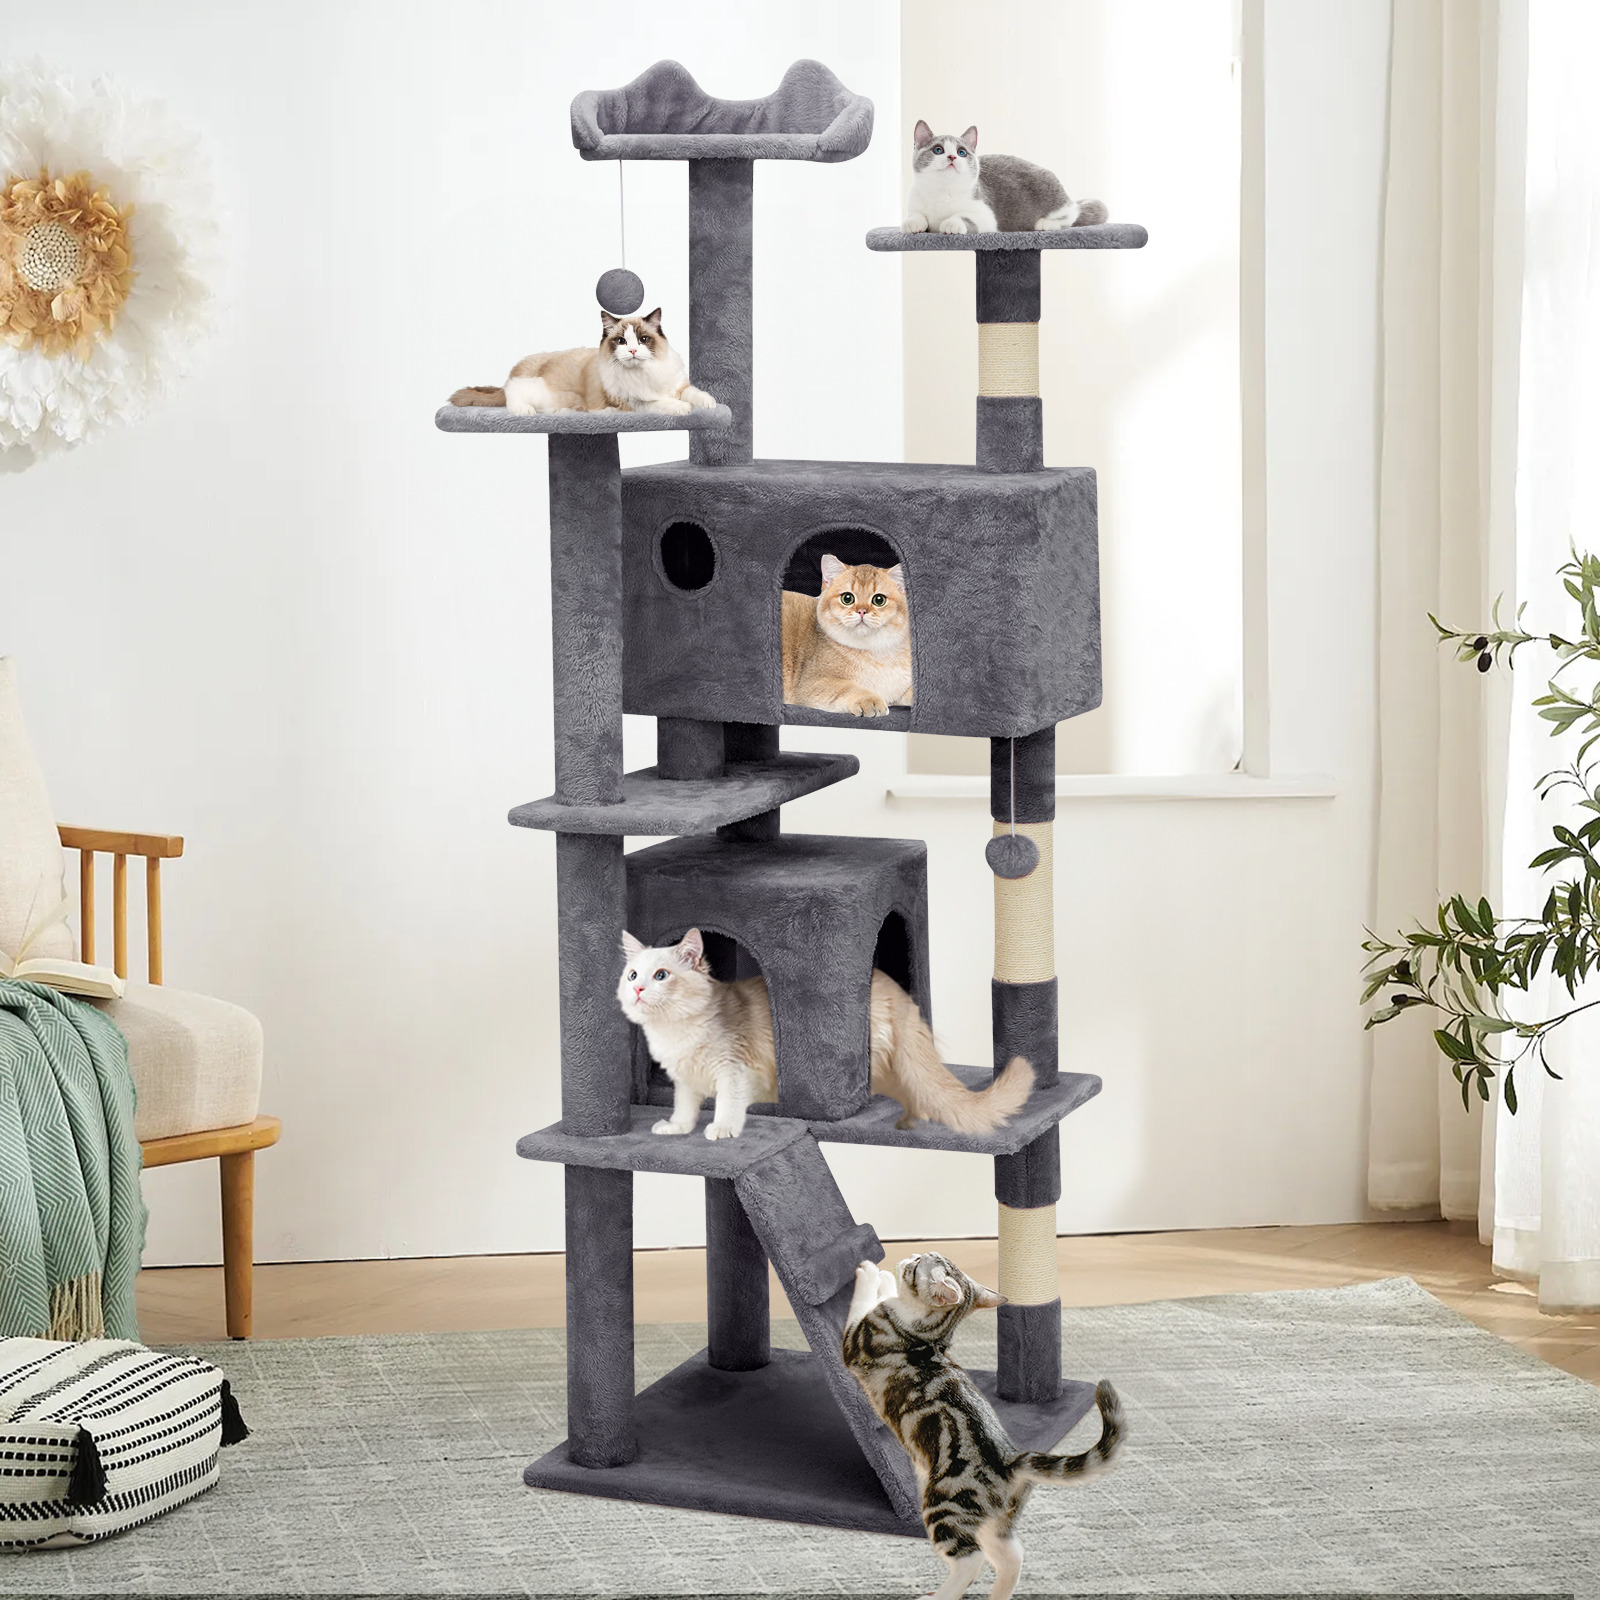 thinkstar Cat Tree Cat Tower Kitten Playing Condo House Multi-Level Playing House For Rest